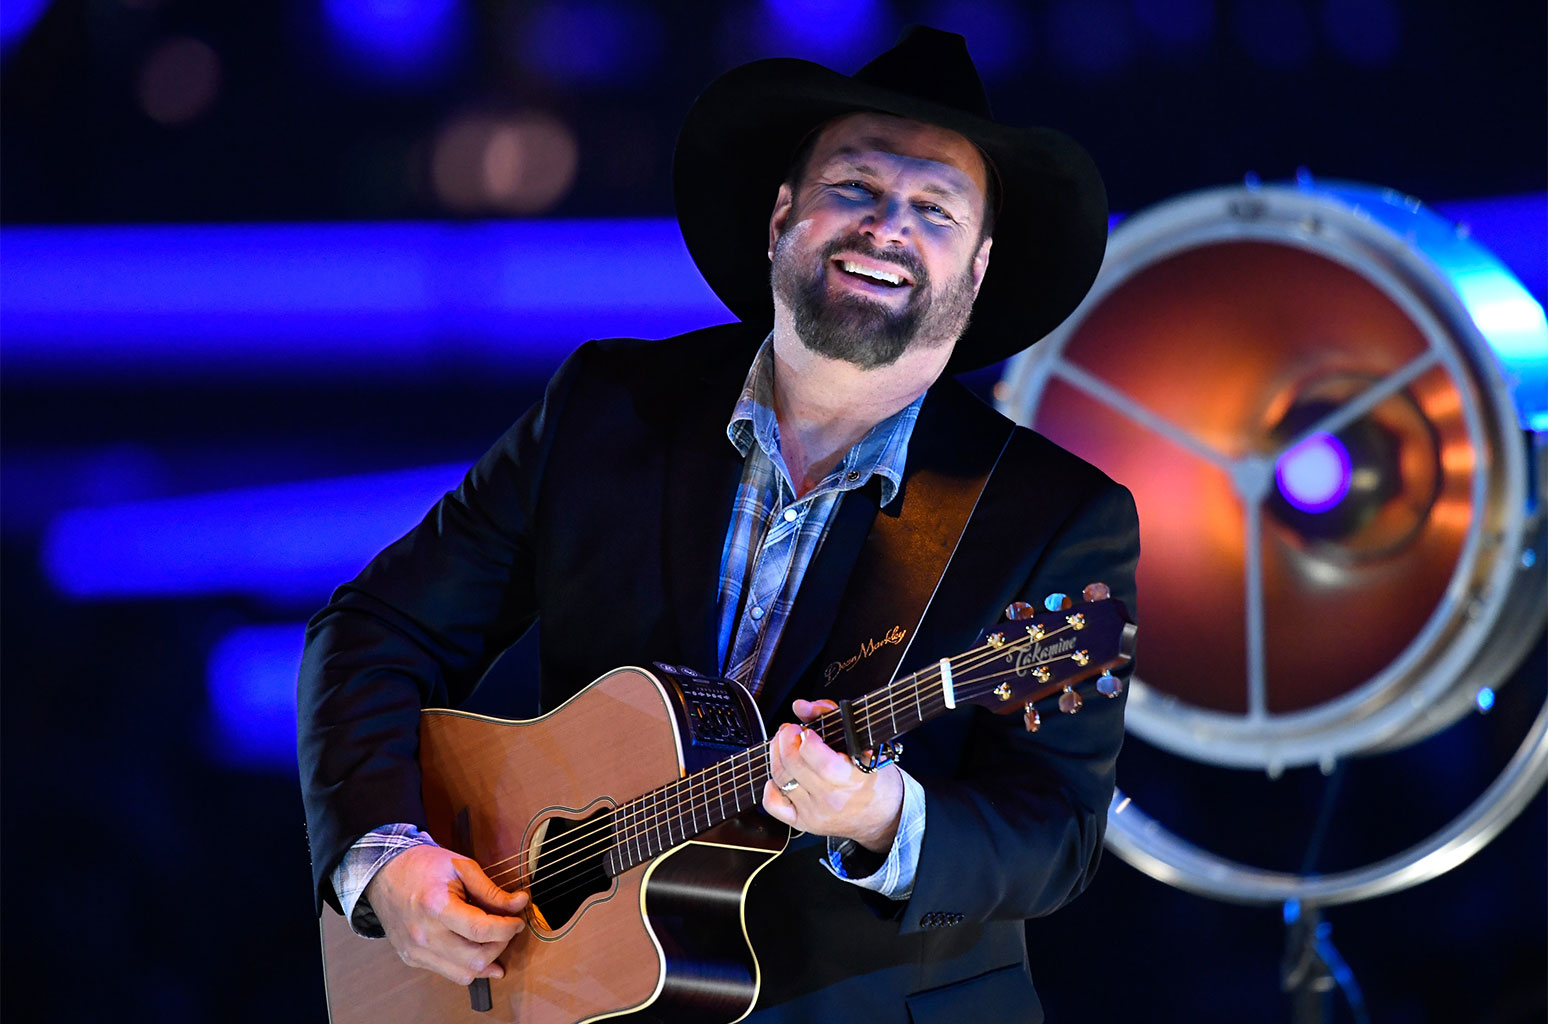 Garth Brooks Extends Longevity on Hot Country Songs Chart With Blake Shelton Duet 'Dive Bar' - www.billboard.com